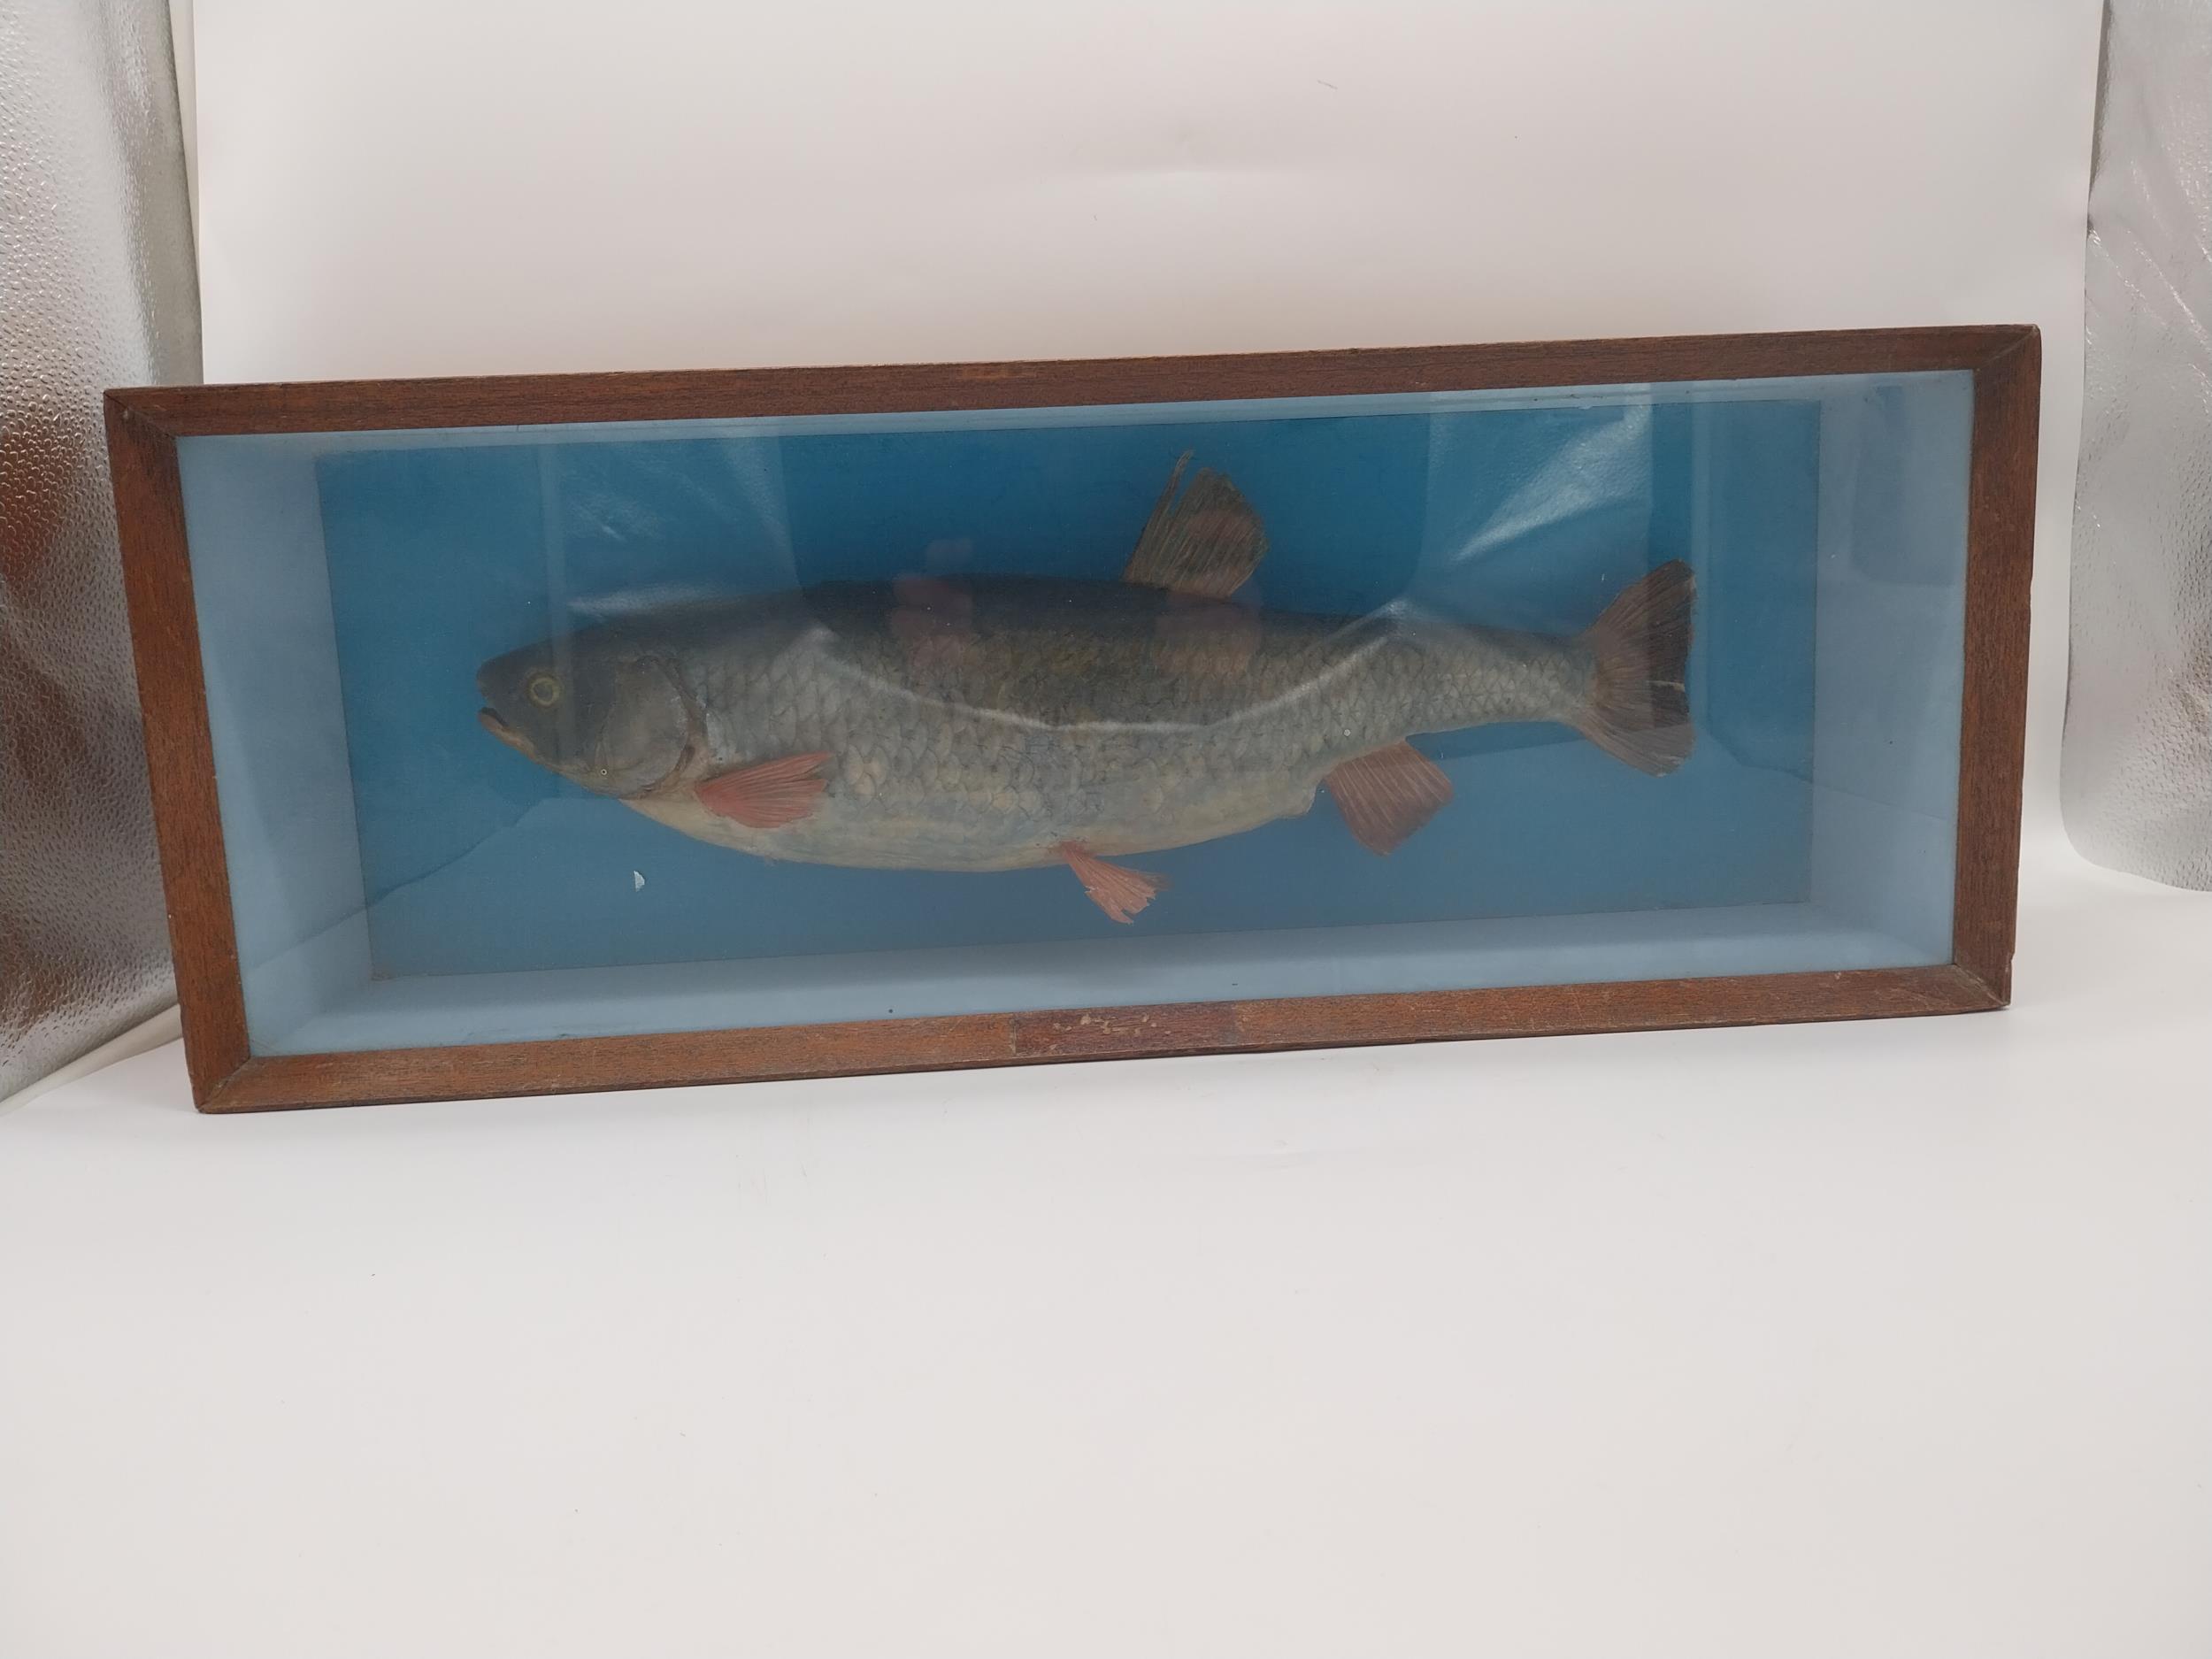 Early 20th C. taxidermy fish in glazed mahogany display case. {23 cm H x 61 m W x 16 cm D]. - Image 4 of 4